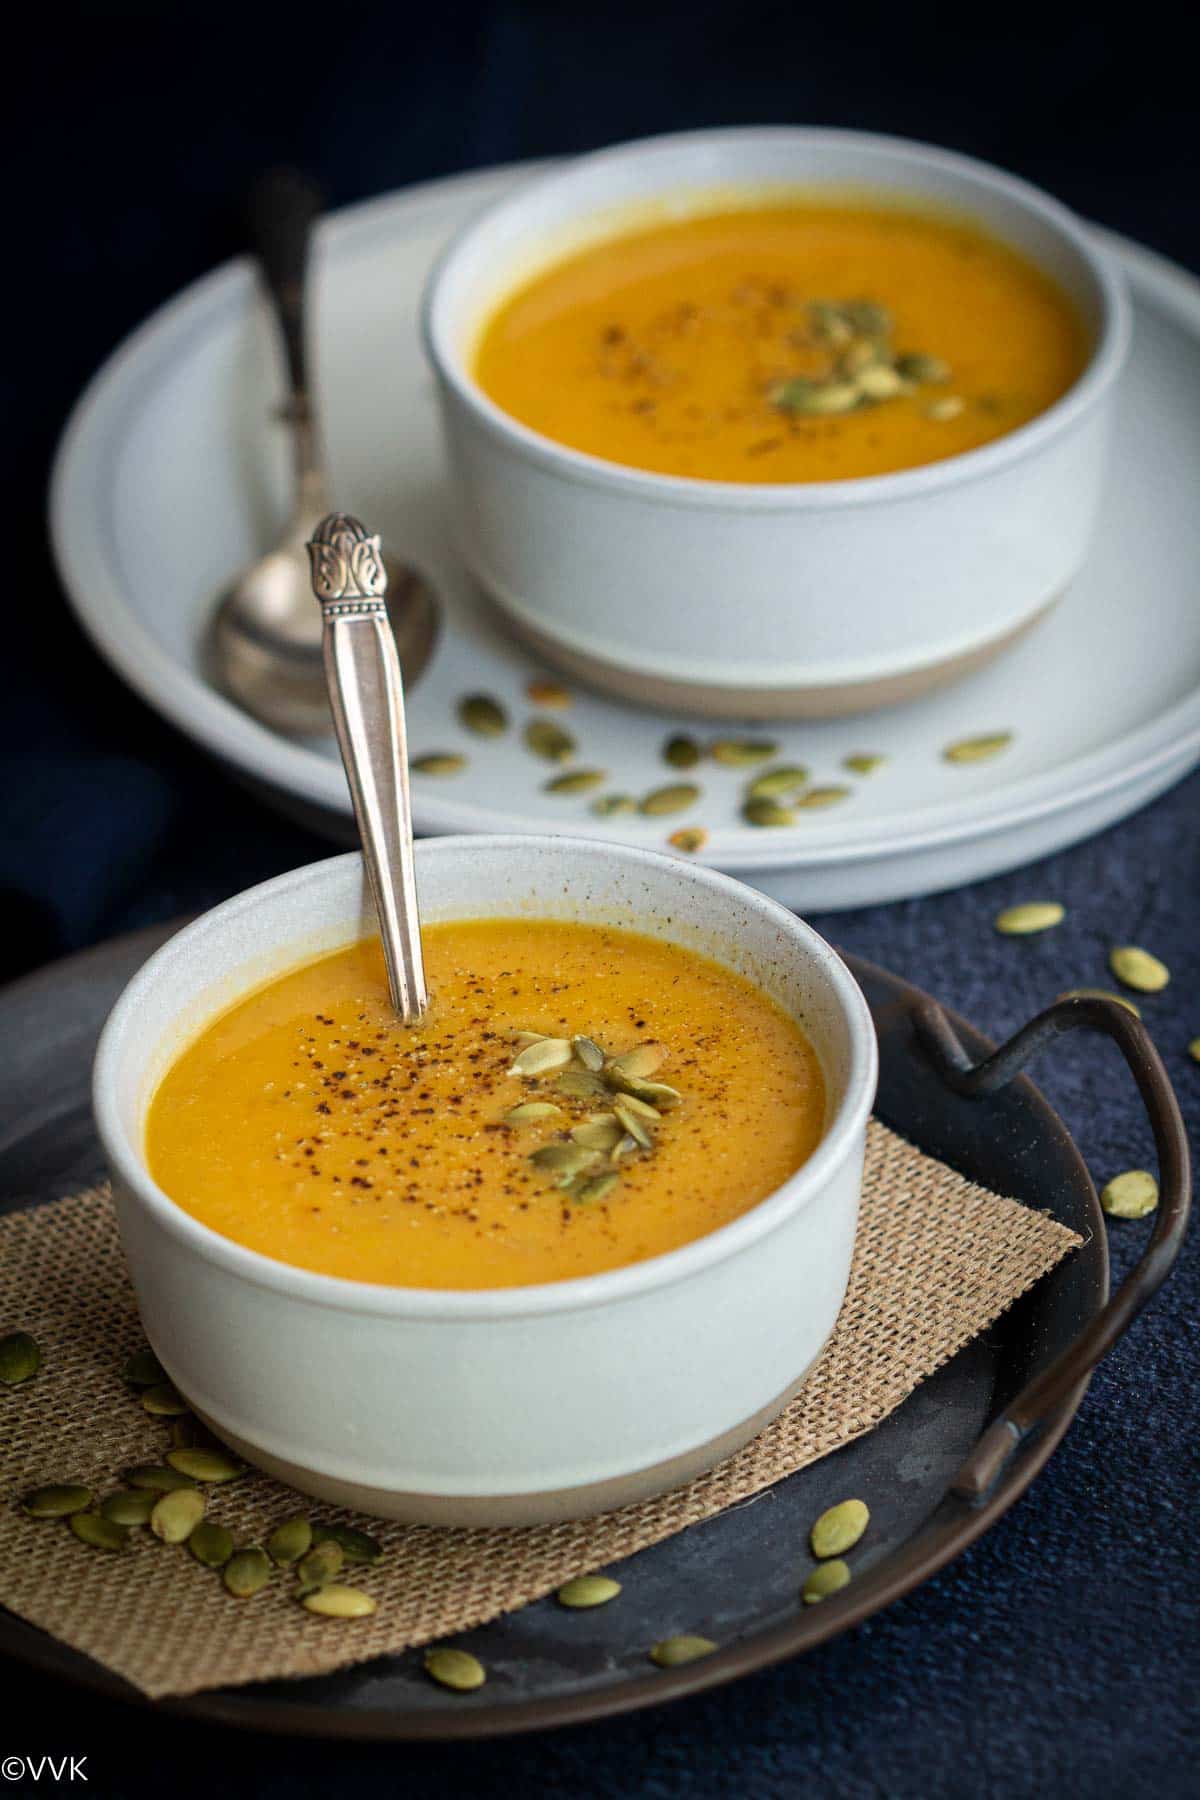 vegan pumpkin soup served in two white ceramic bowls placed on burlap cloth